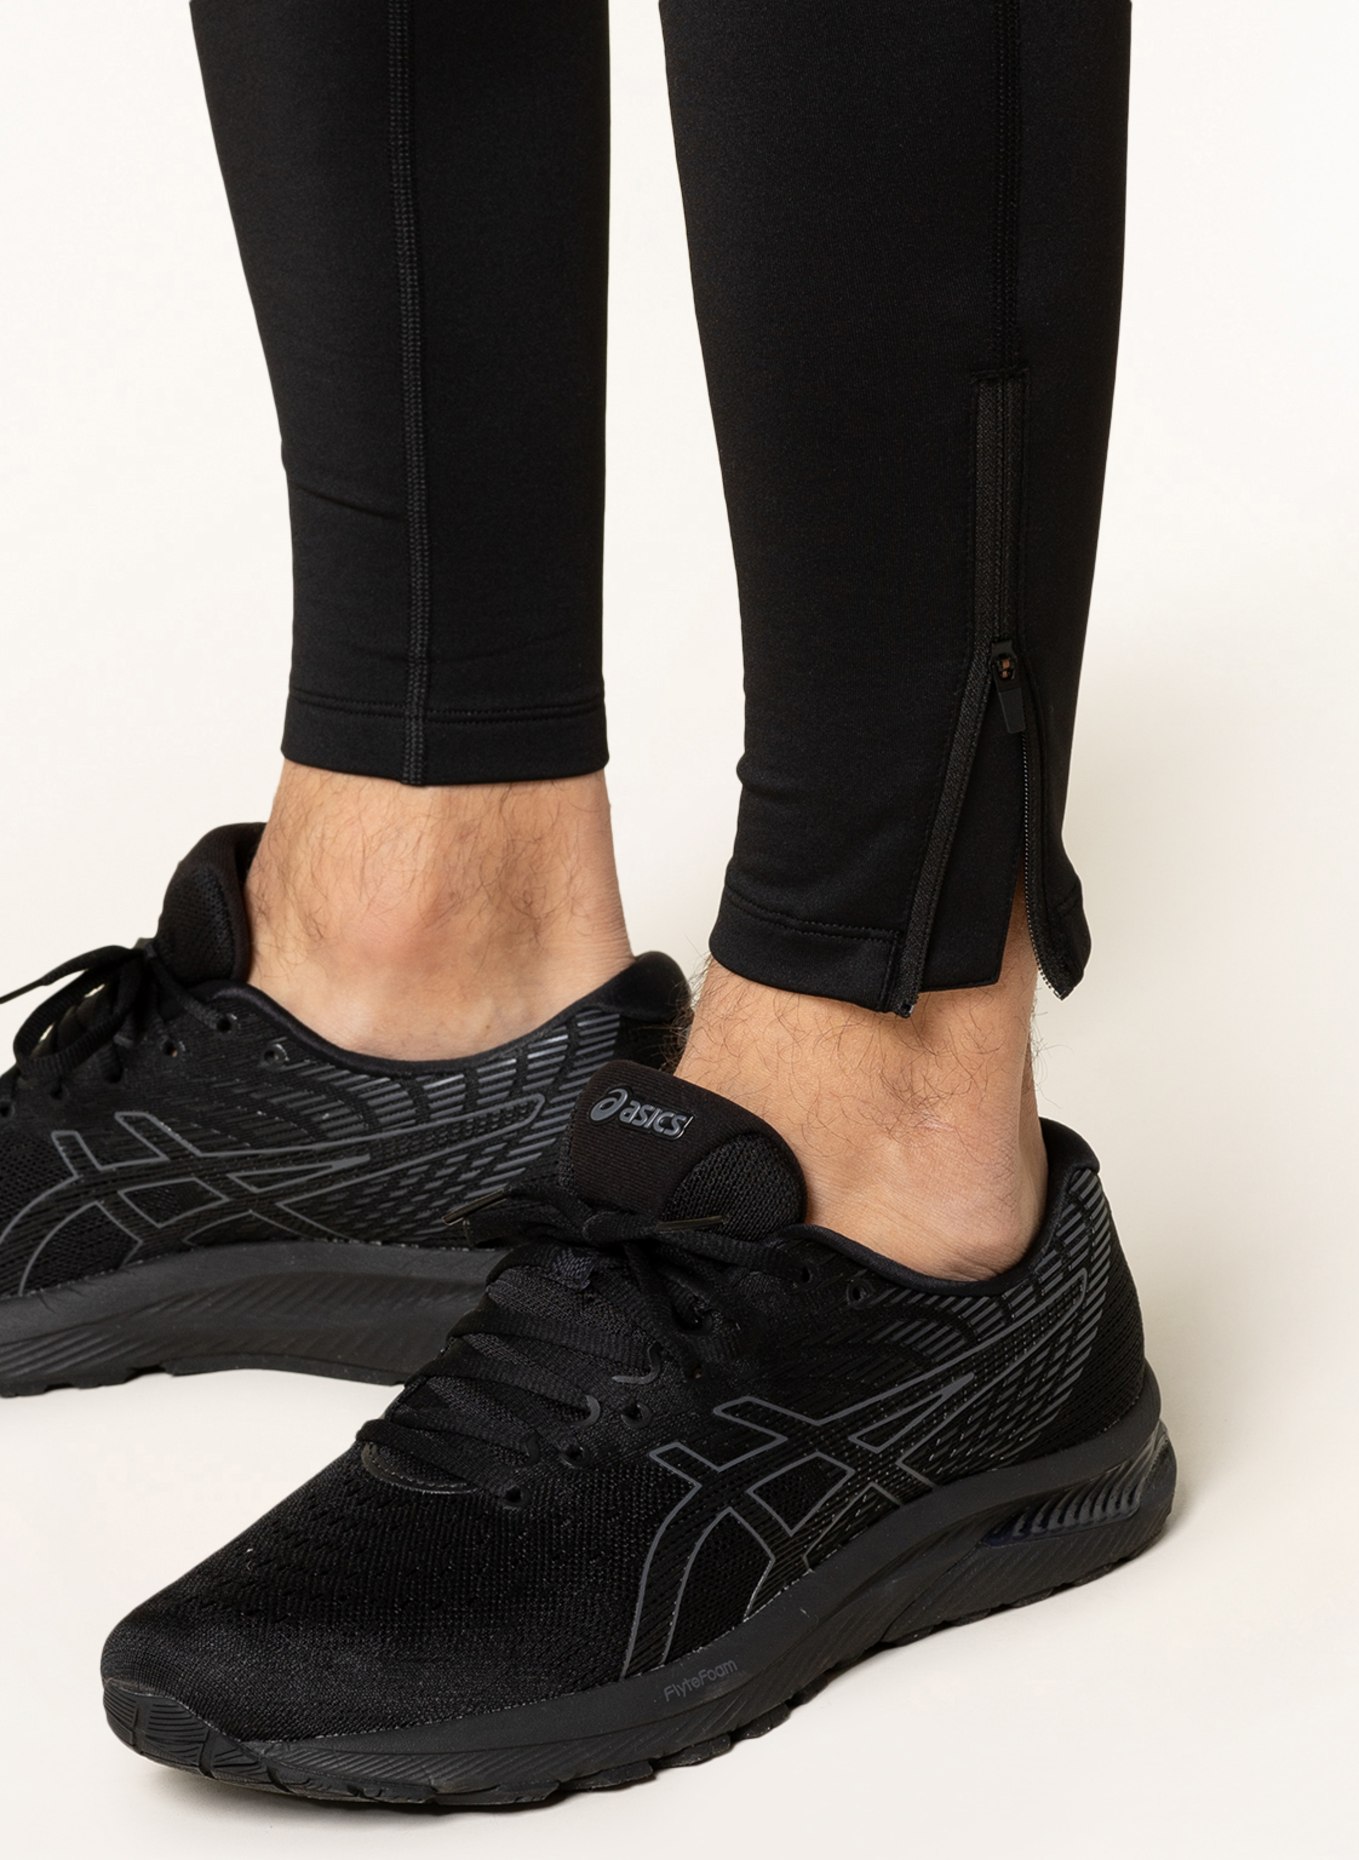 ASICS TIGHT WINTER in CORE black trousers Running